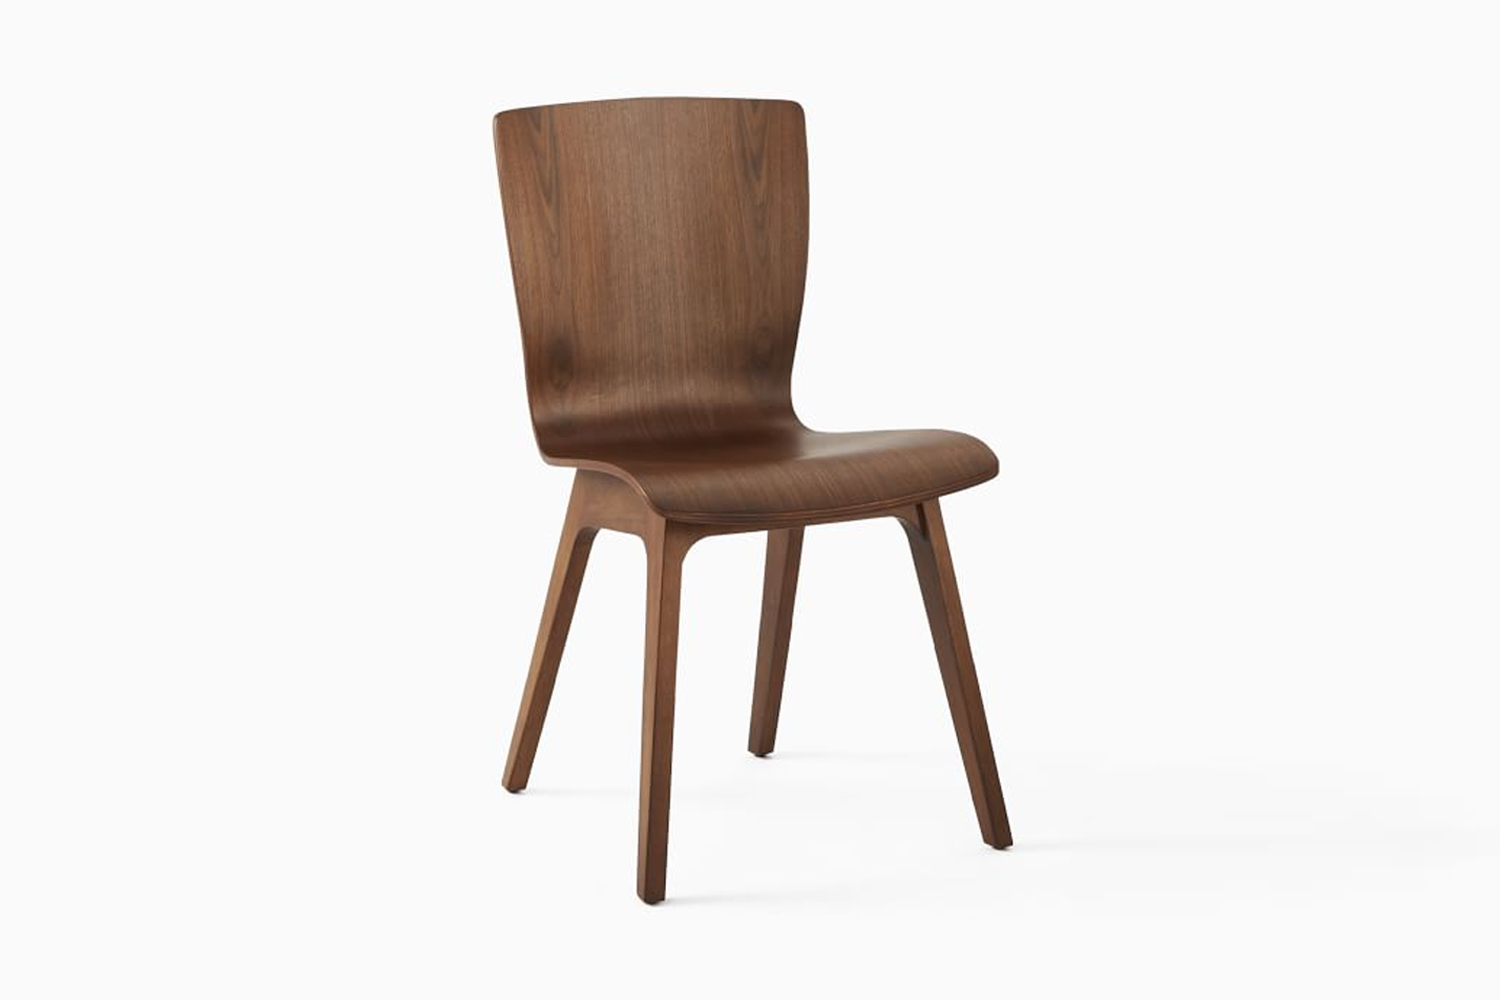 the crest bentwood dining chair set of \2 is \$349 at west elm. 13